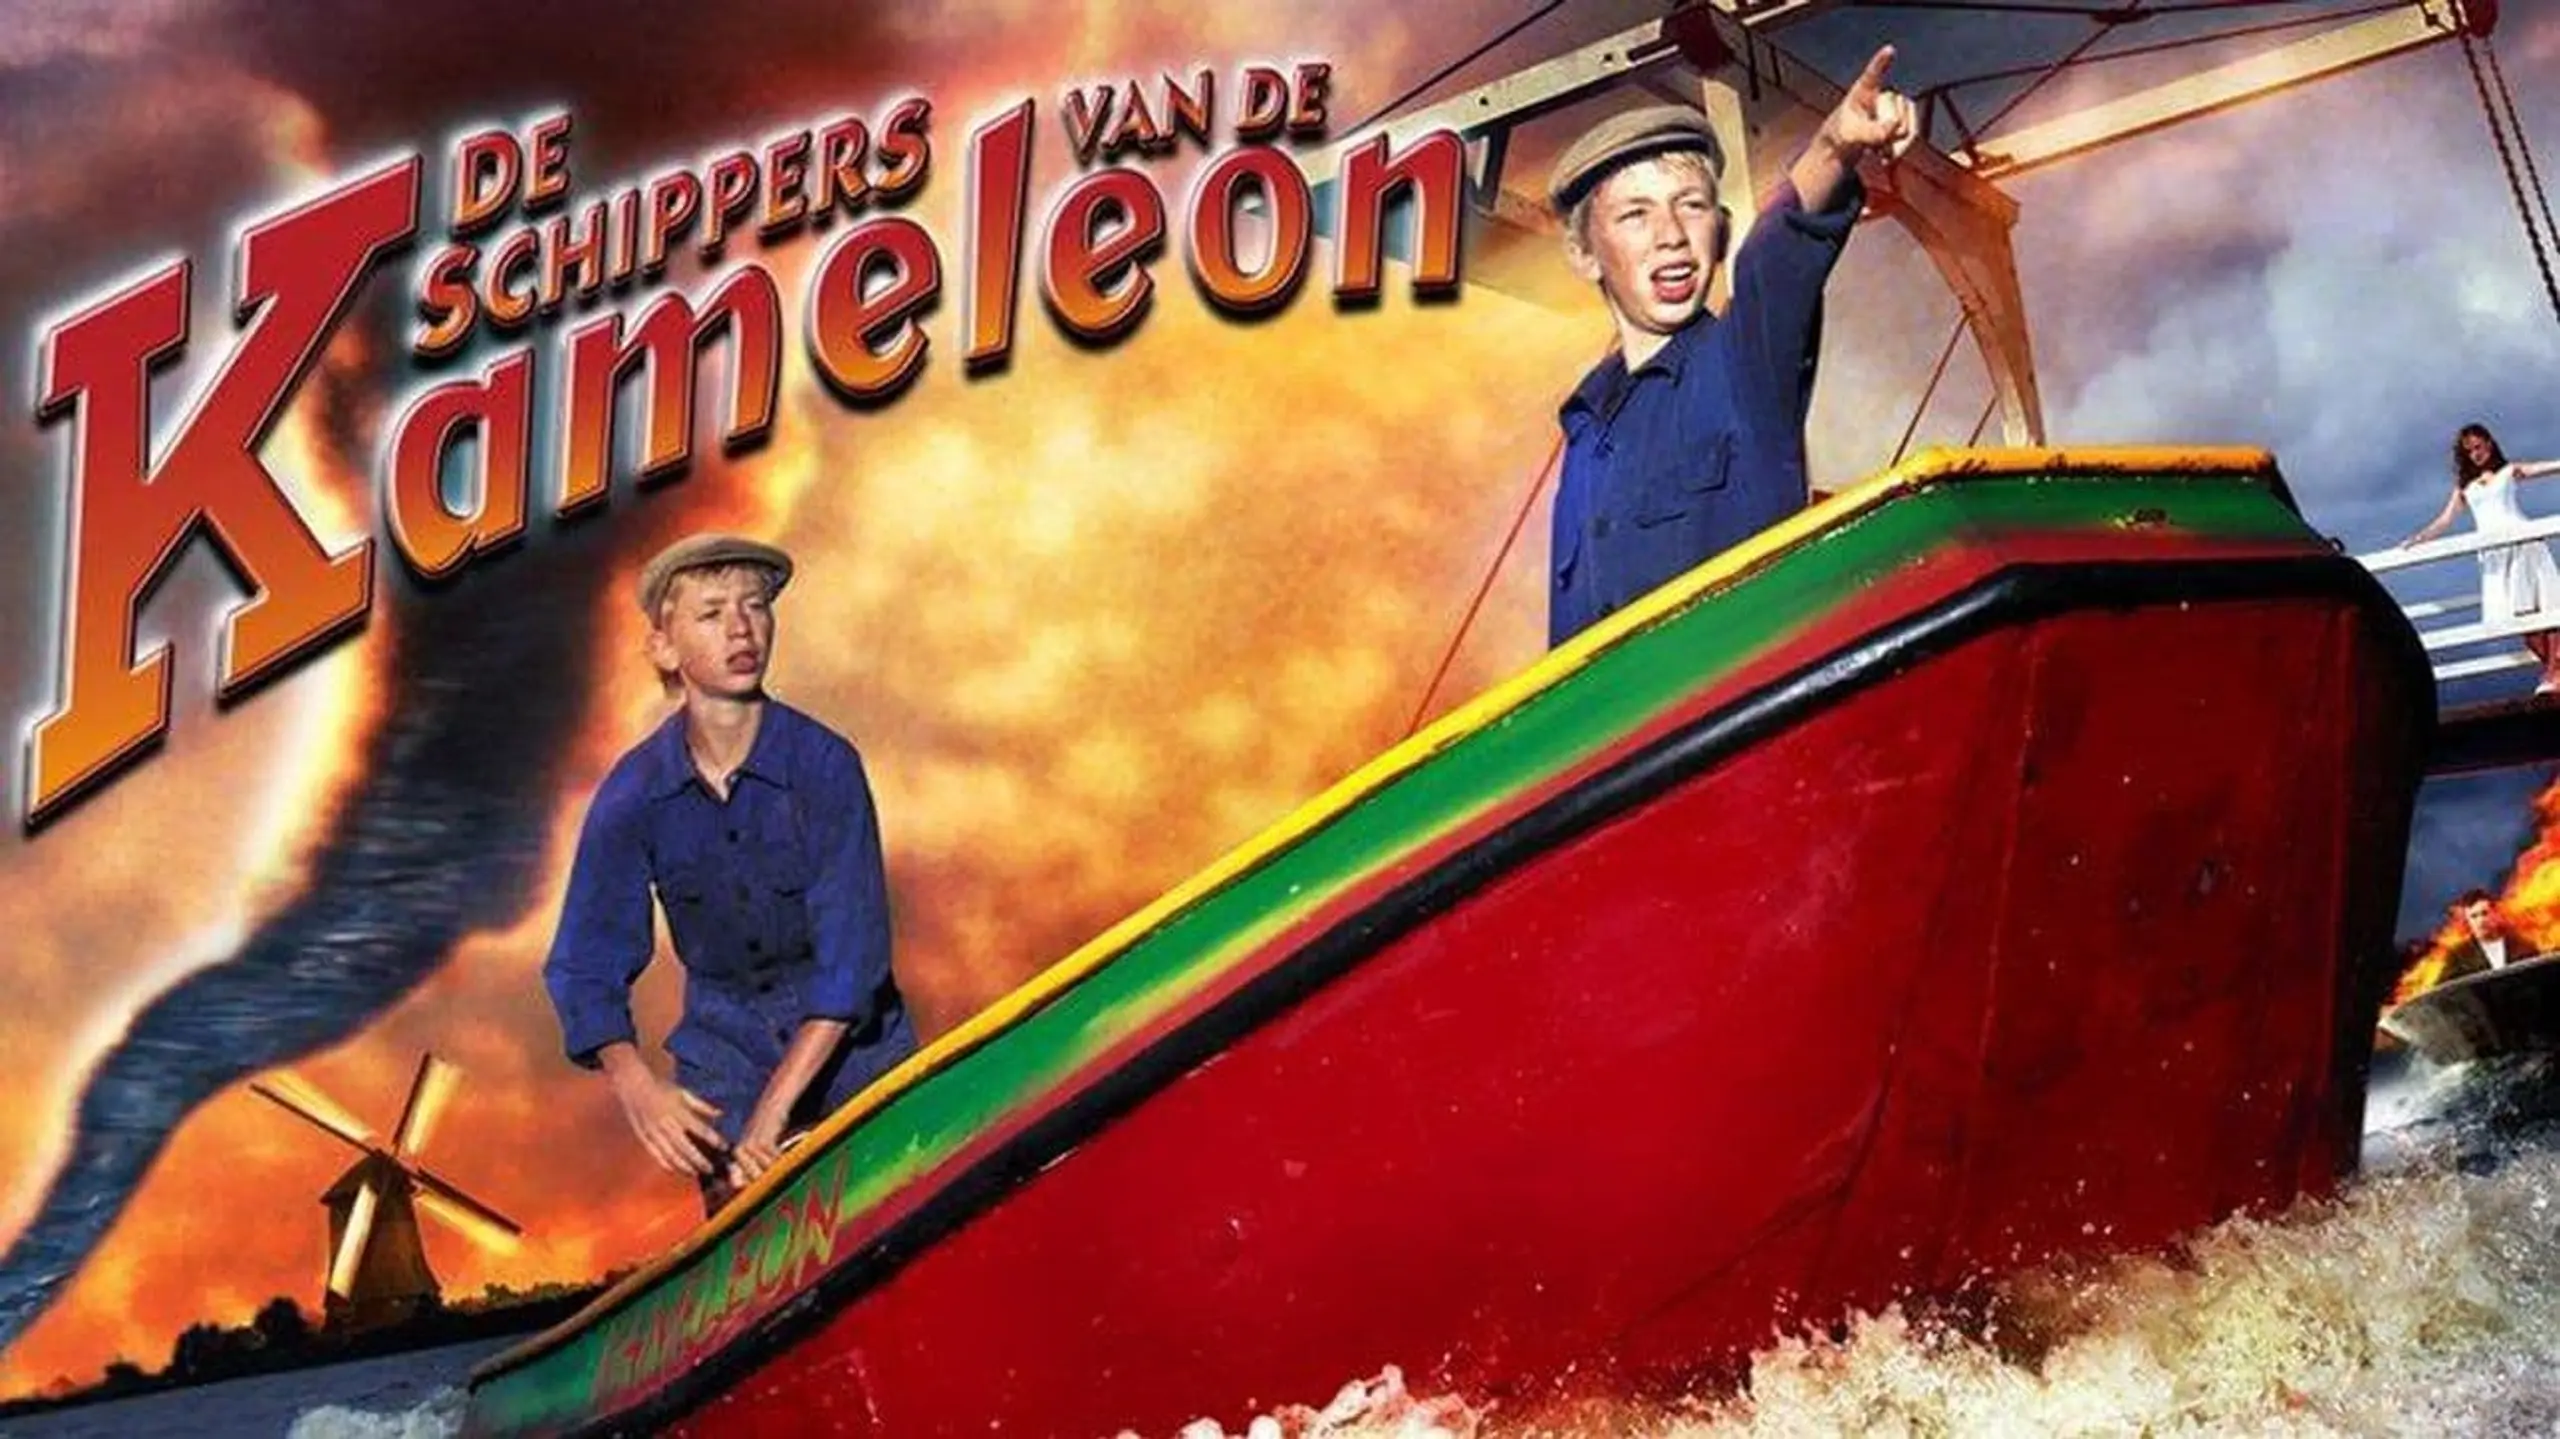 The Skippers of the Cameleon 2